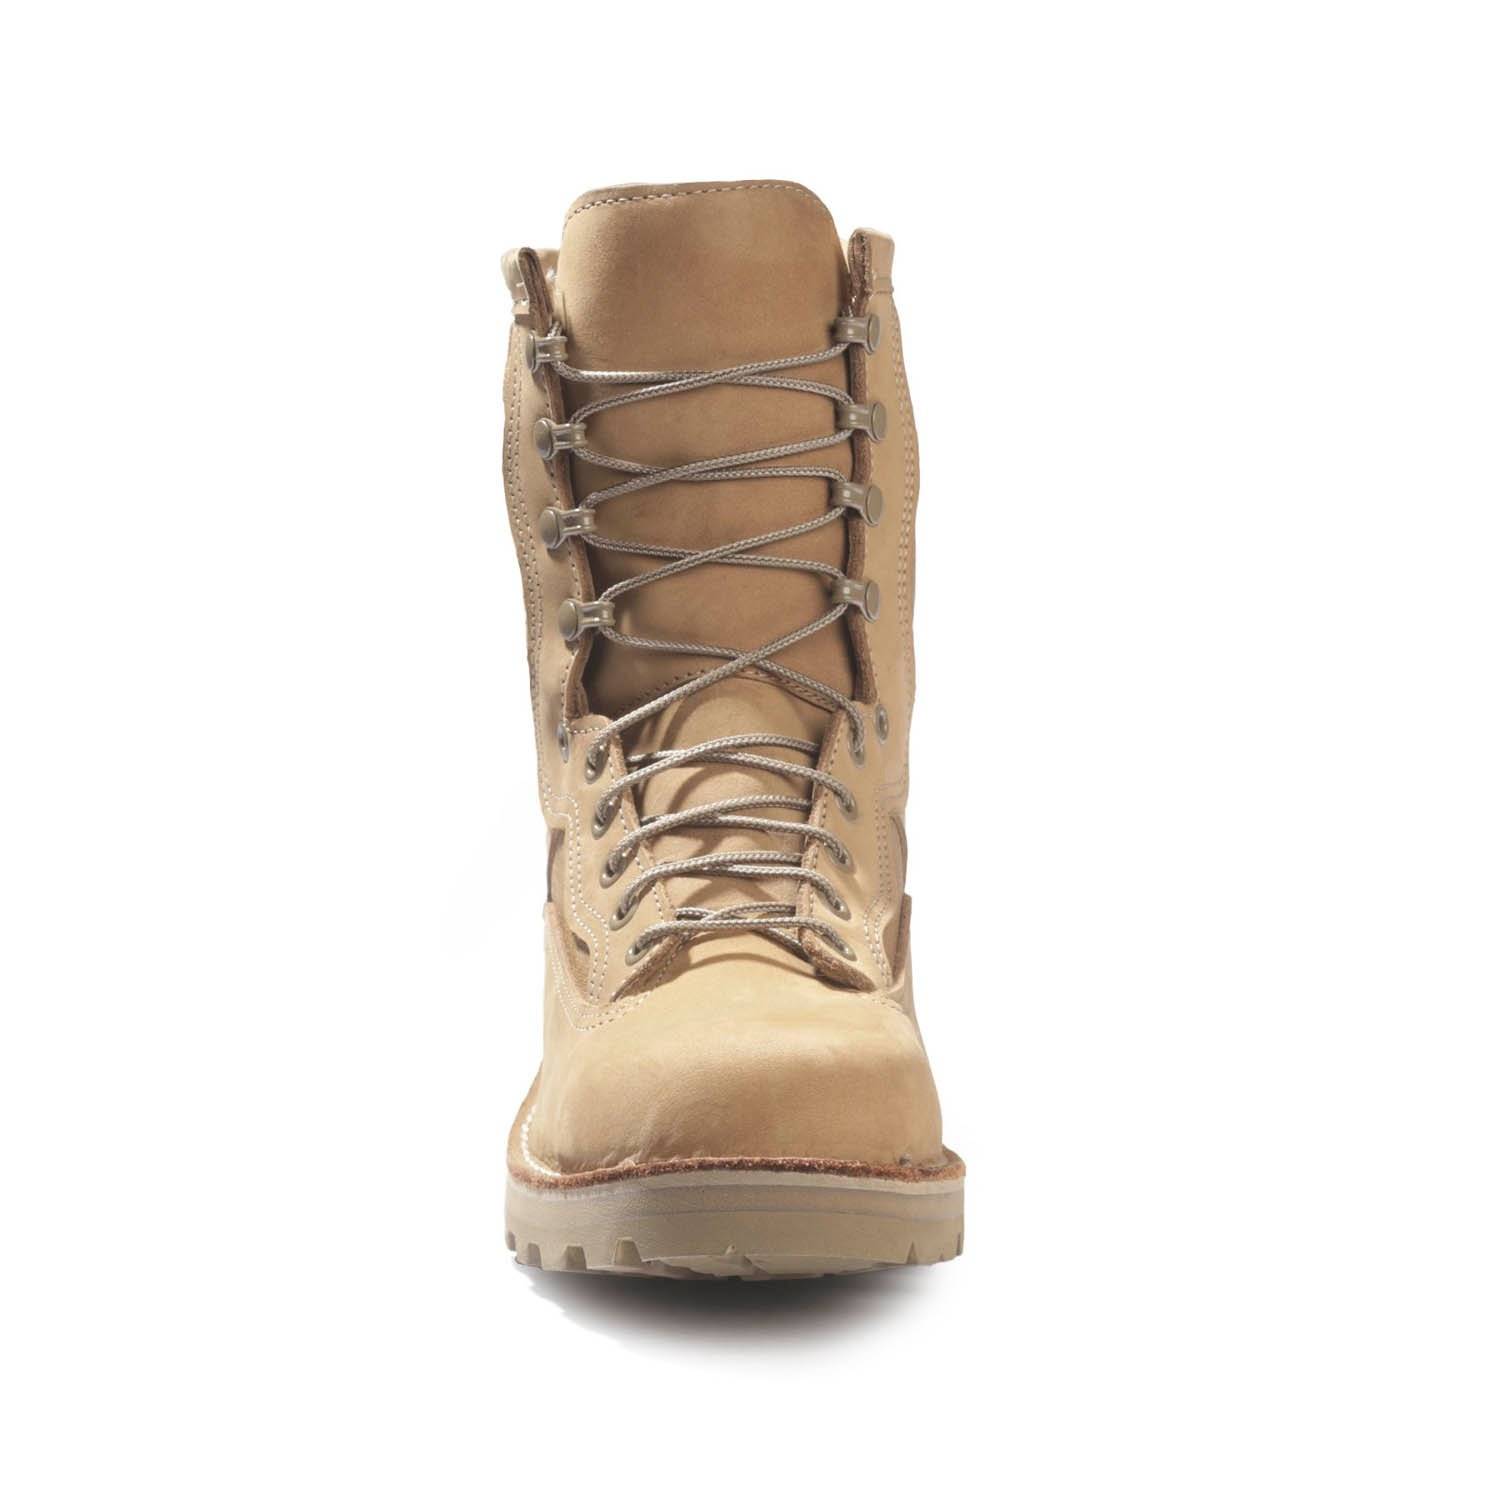 Danner Marine Expeditionary Boot 8